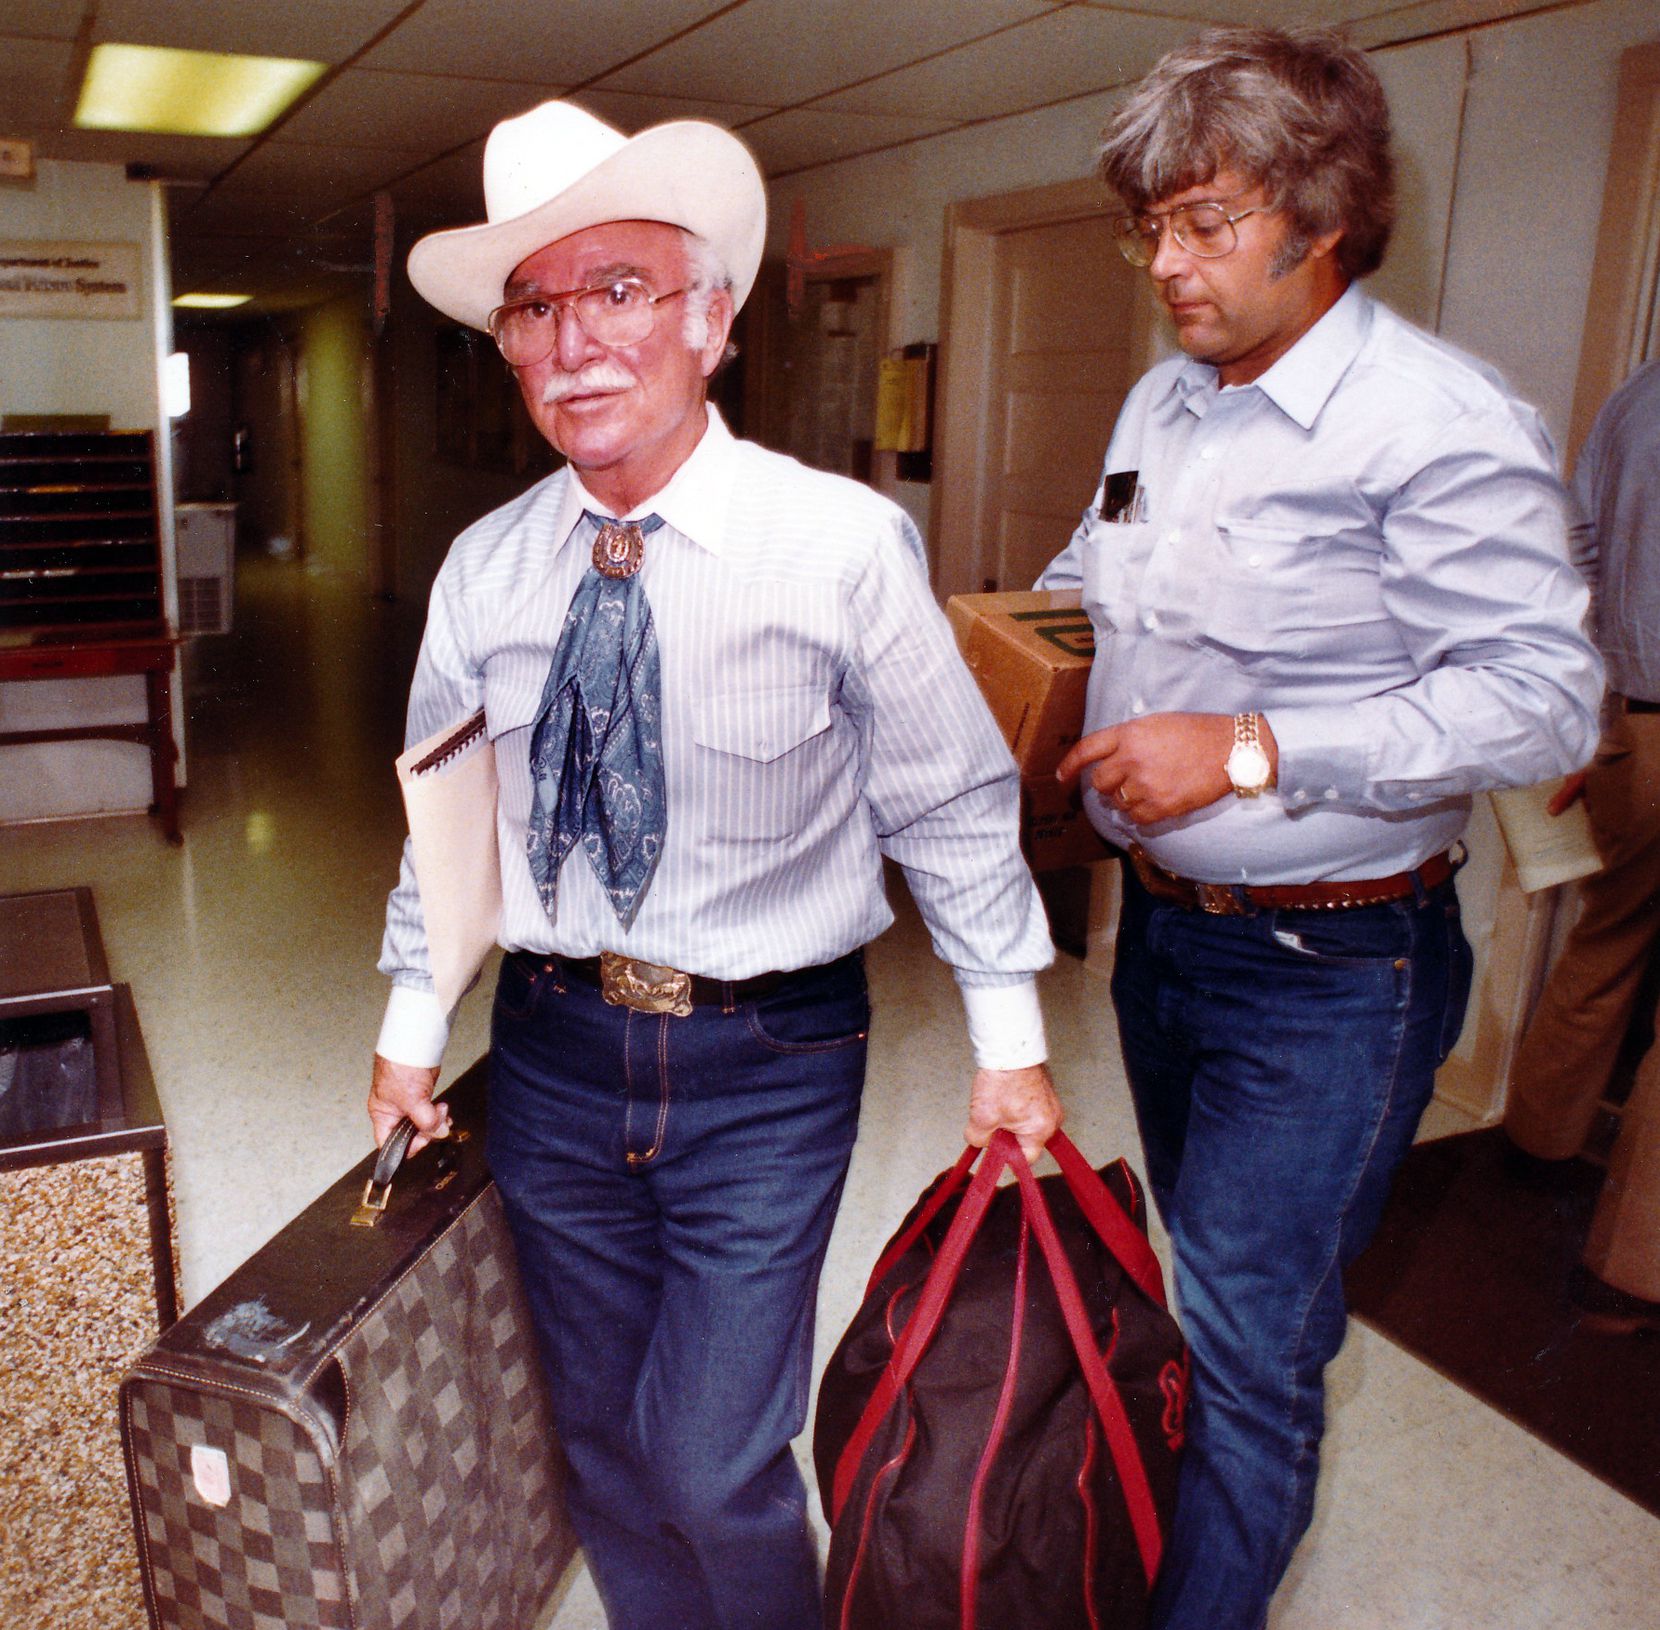 Rex Cauble (left) and his son Lewis carry Cauble's belongings down a hallway in the federal...